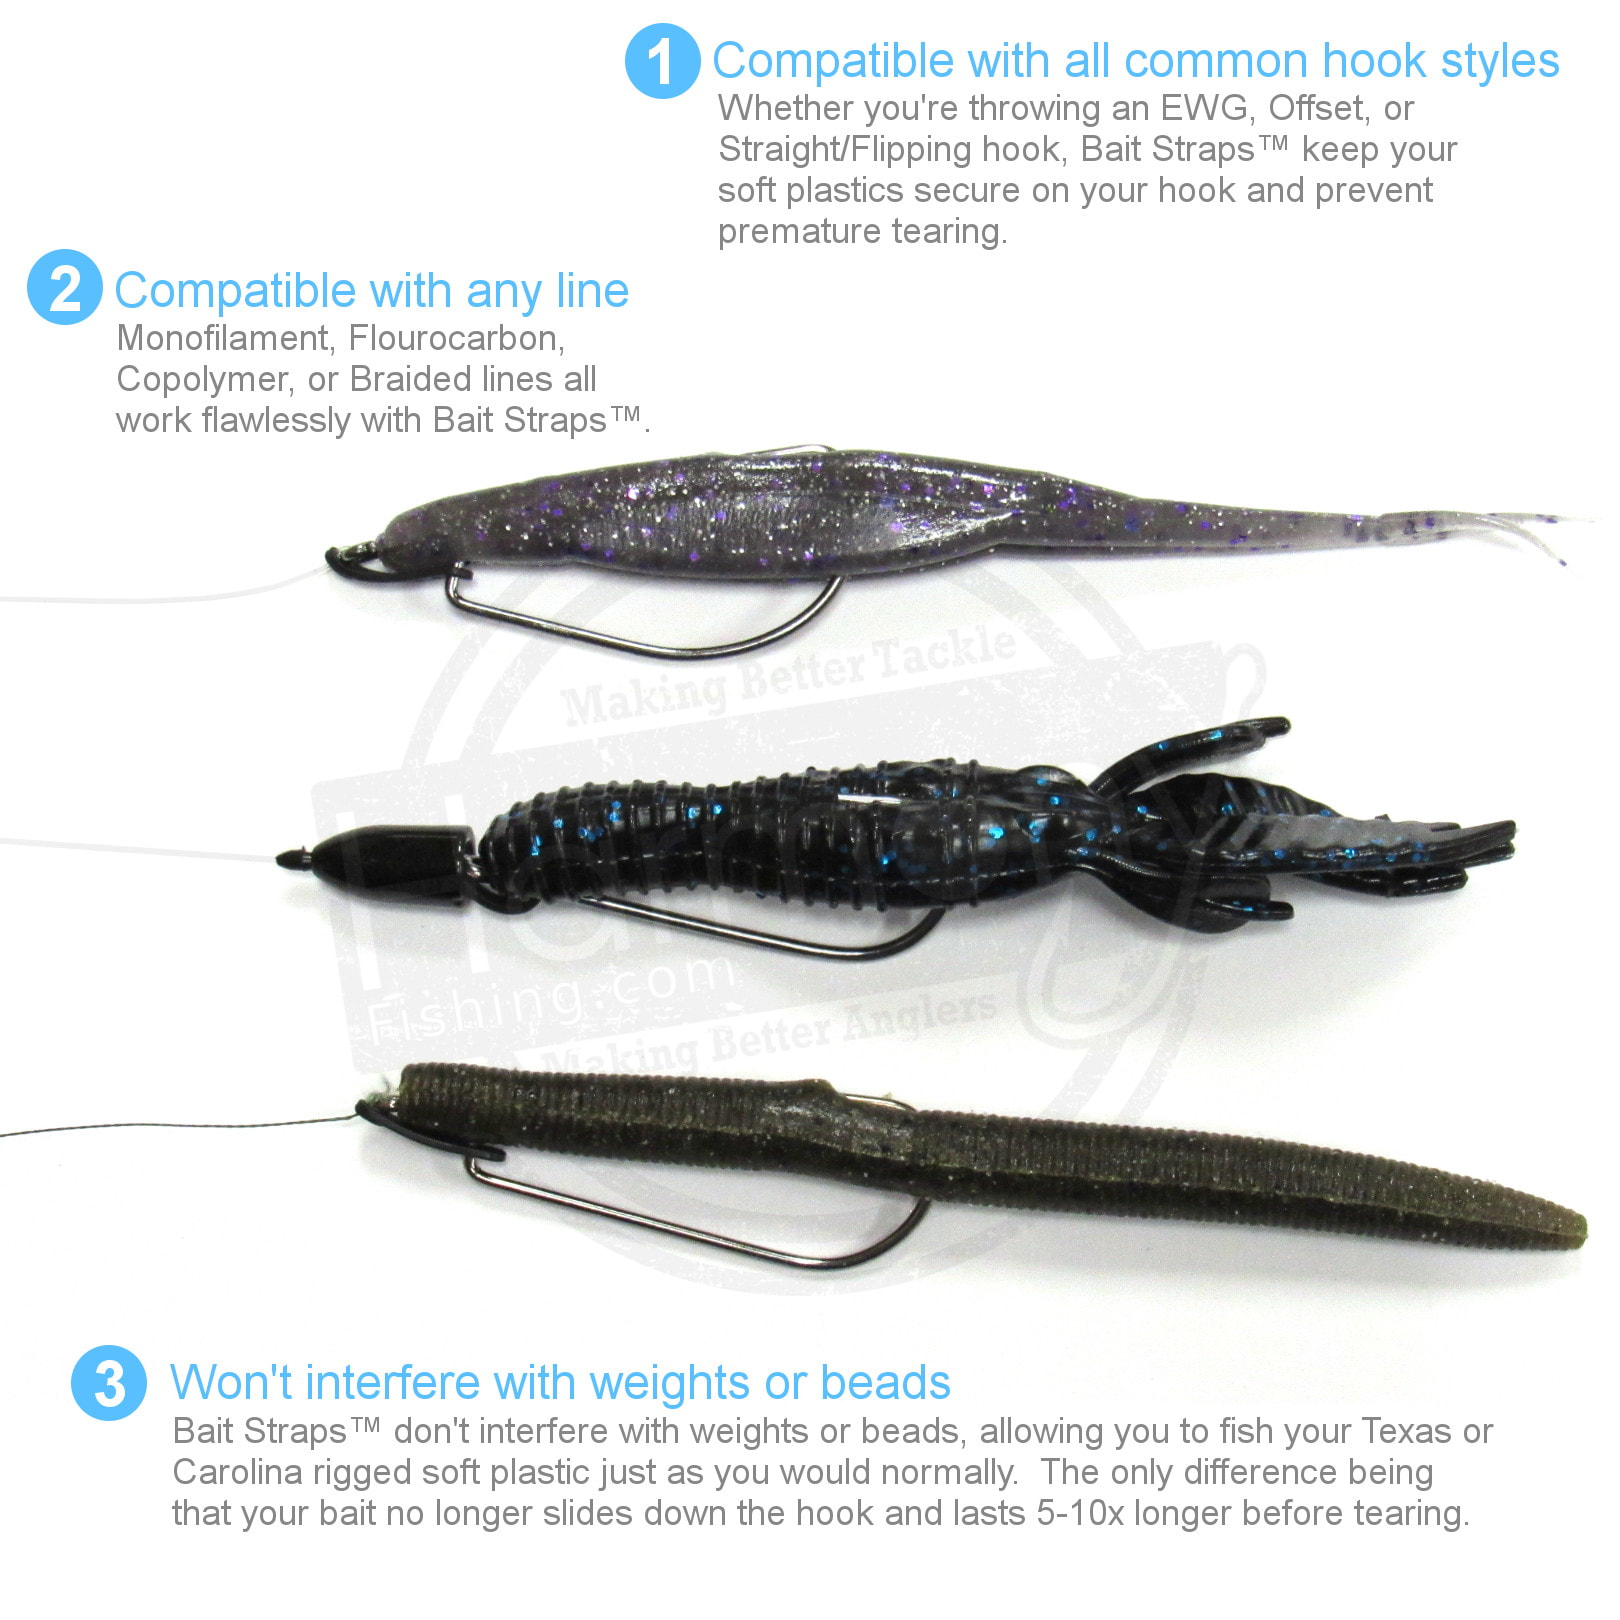 Bait Straps - Secure your soft plastic baits on your hook to